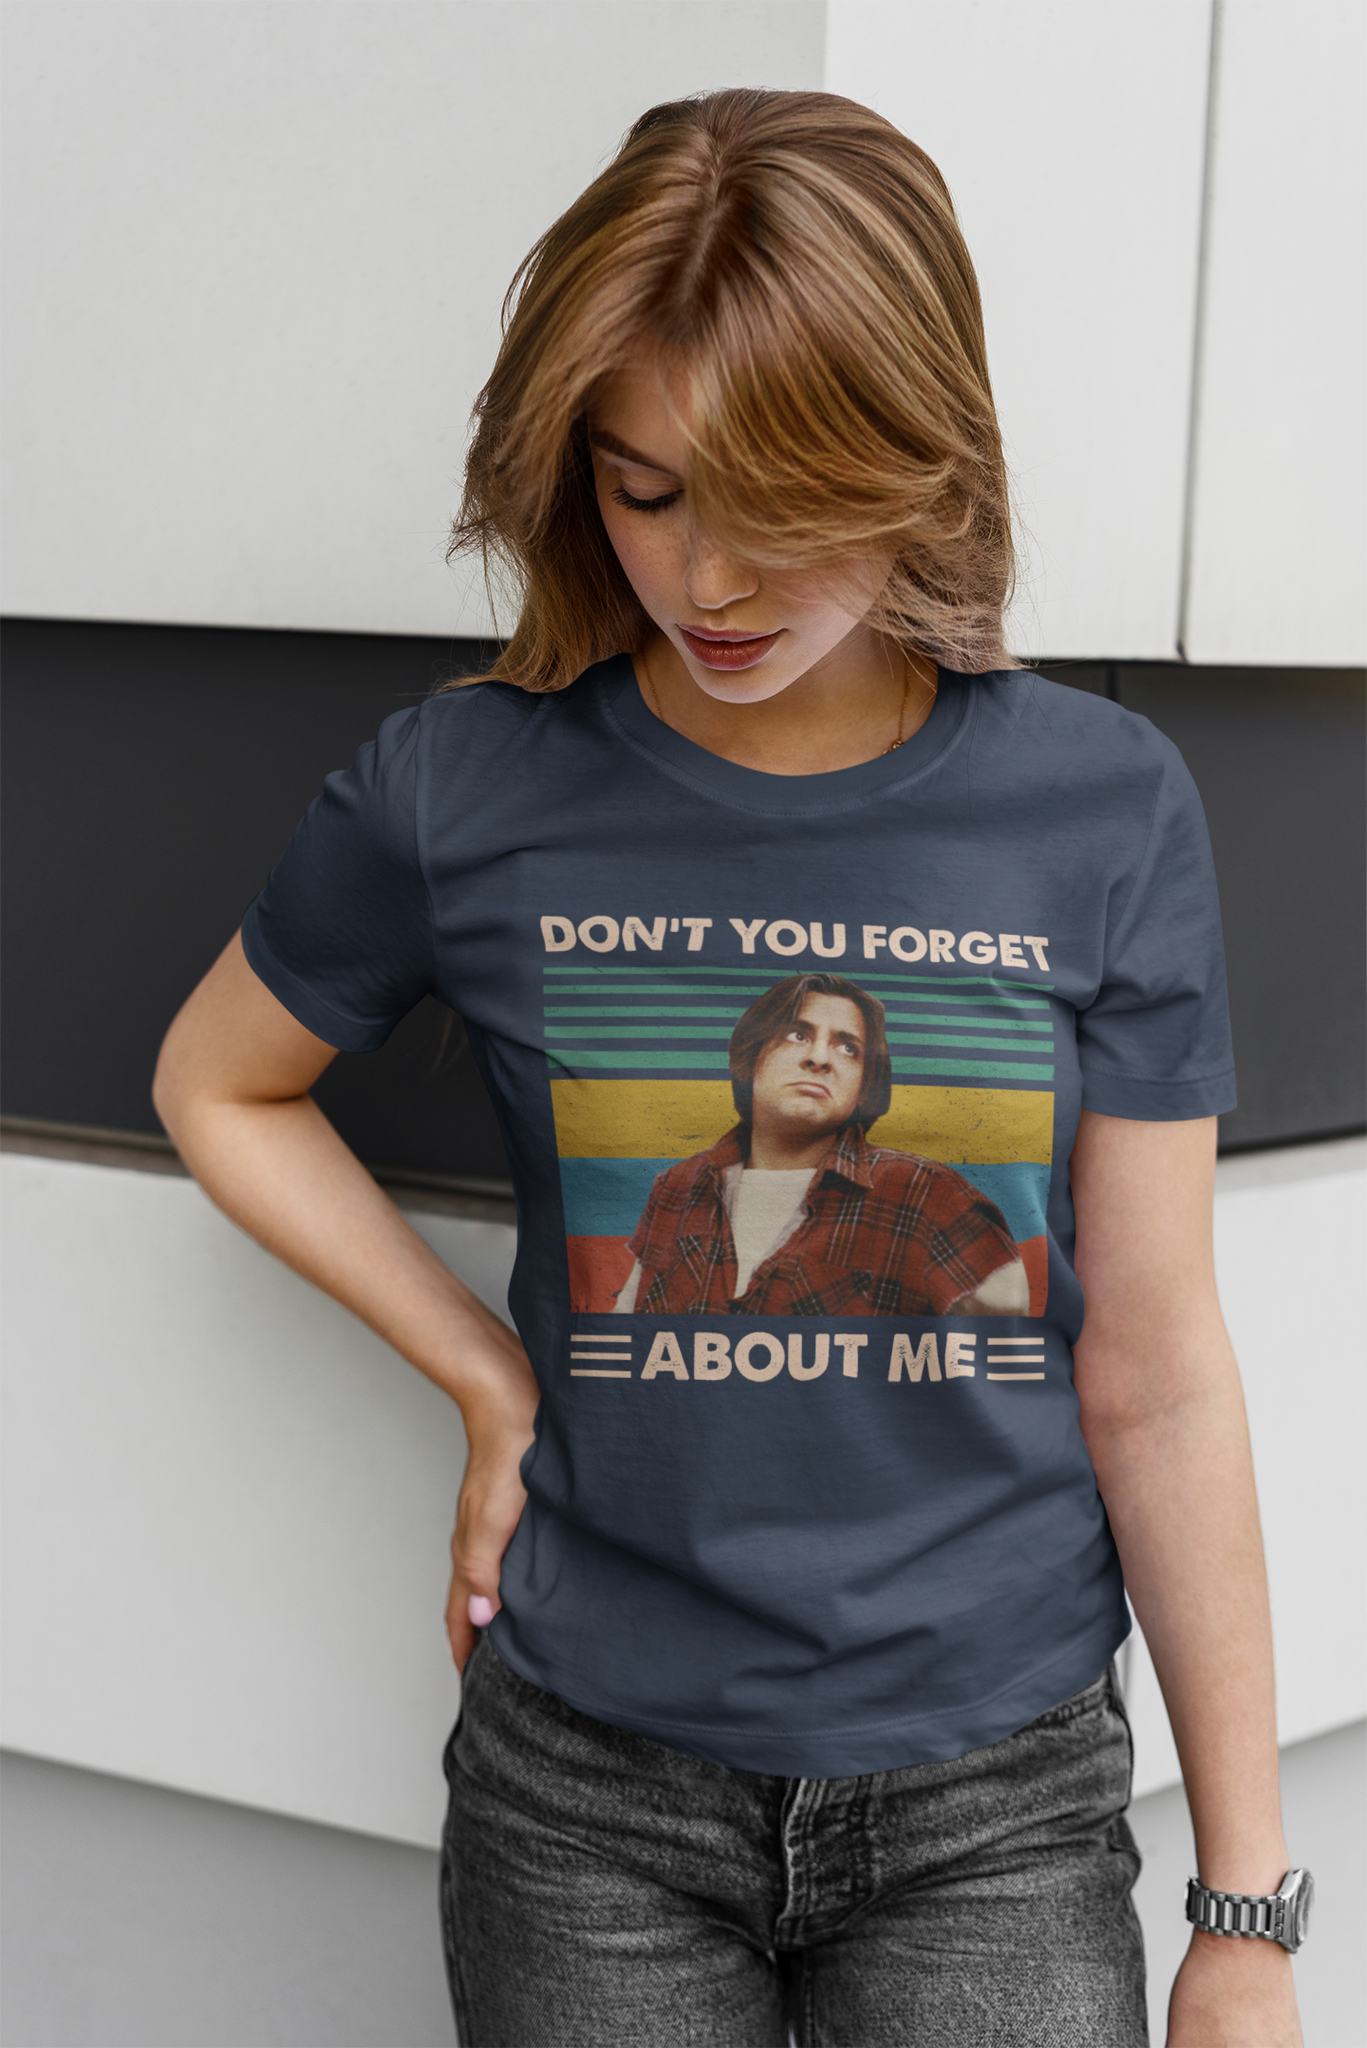 Breakfast Club Vintage T Shirt, John Bender T Shirt, Dont You Forget About Me Tshirt